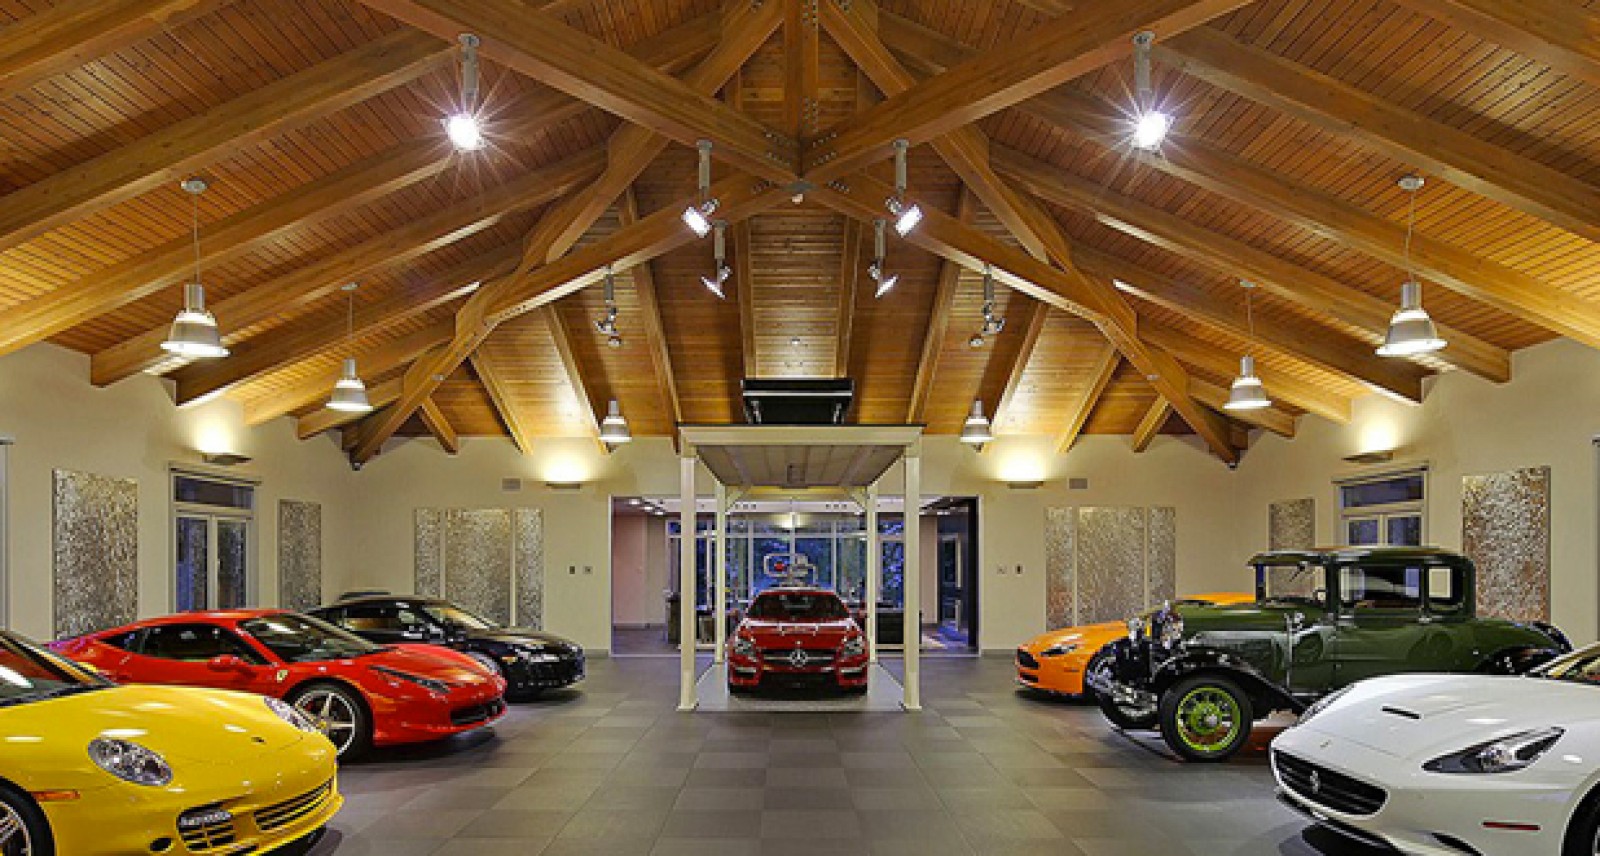 Daily 5 The exotic car garage of your dreams plus the 